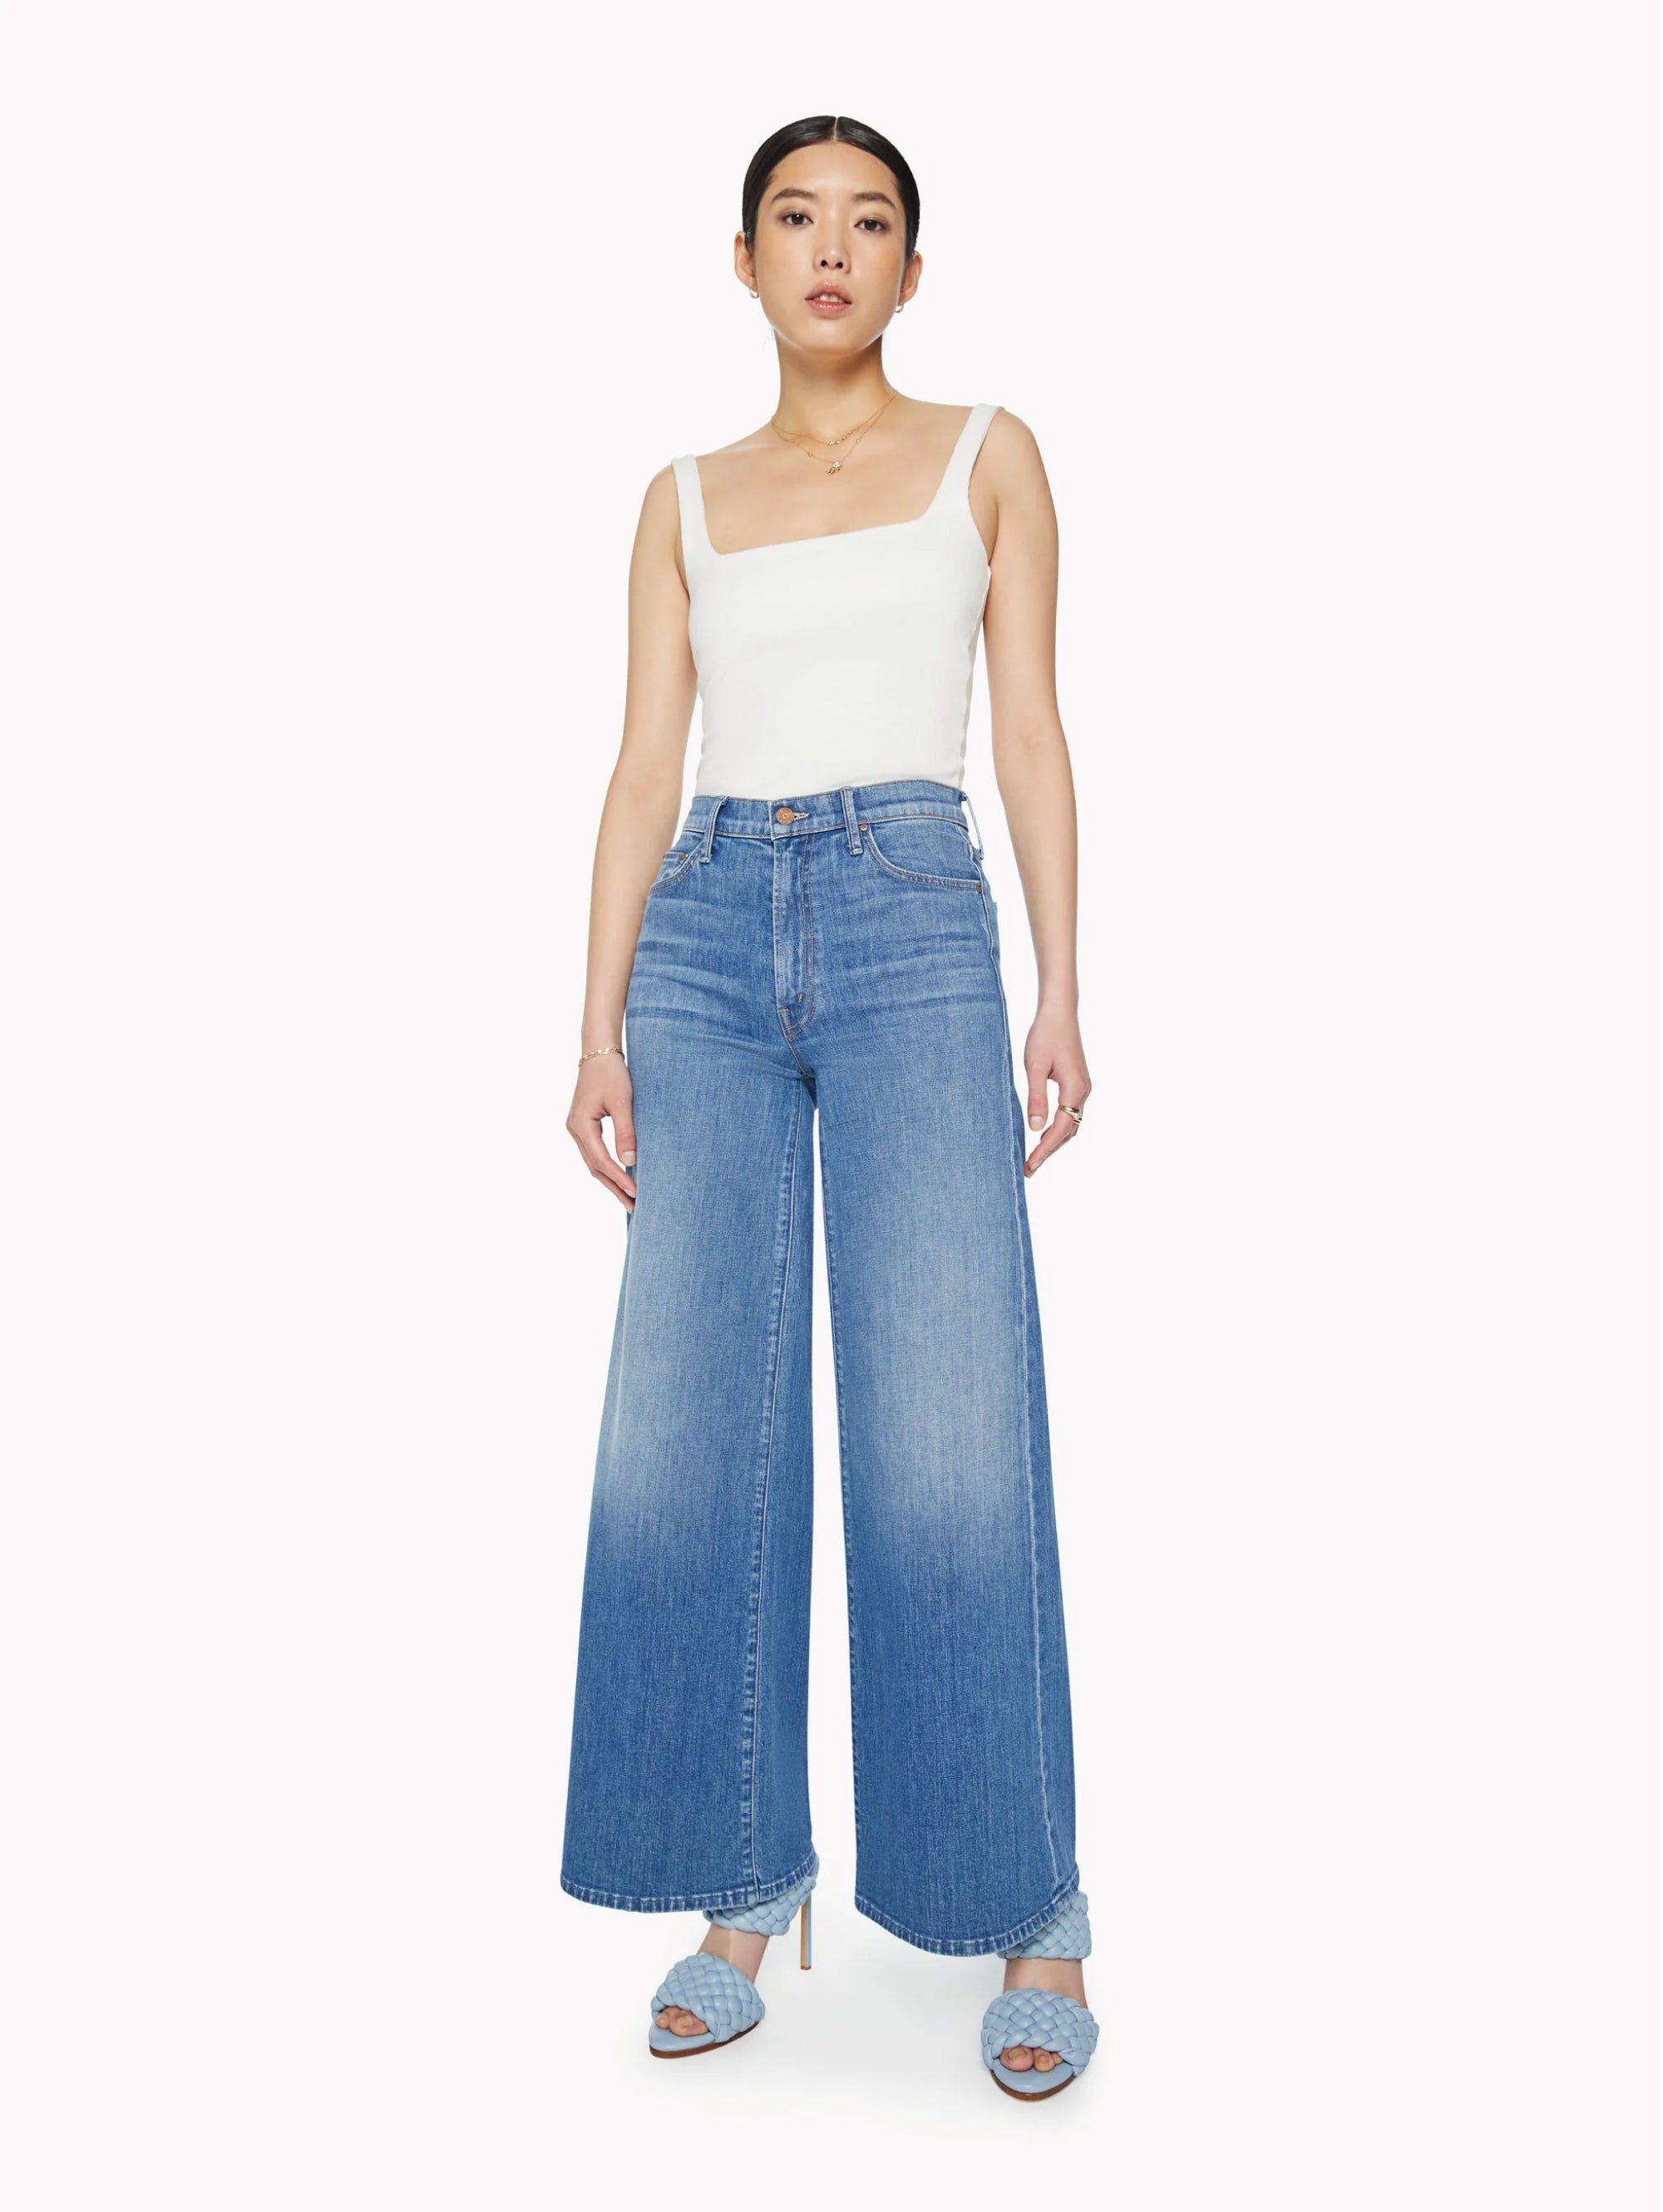 The Undercover Blue Wide Leg and High Waist Jeans